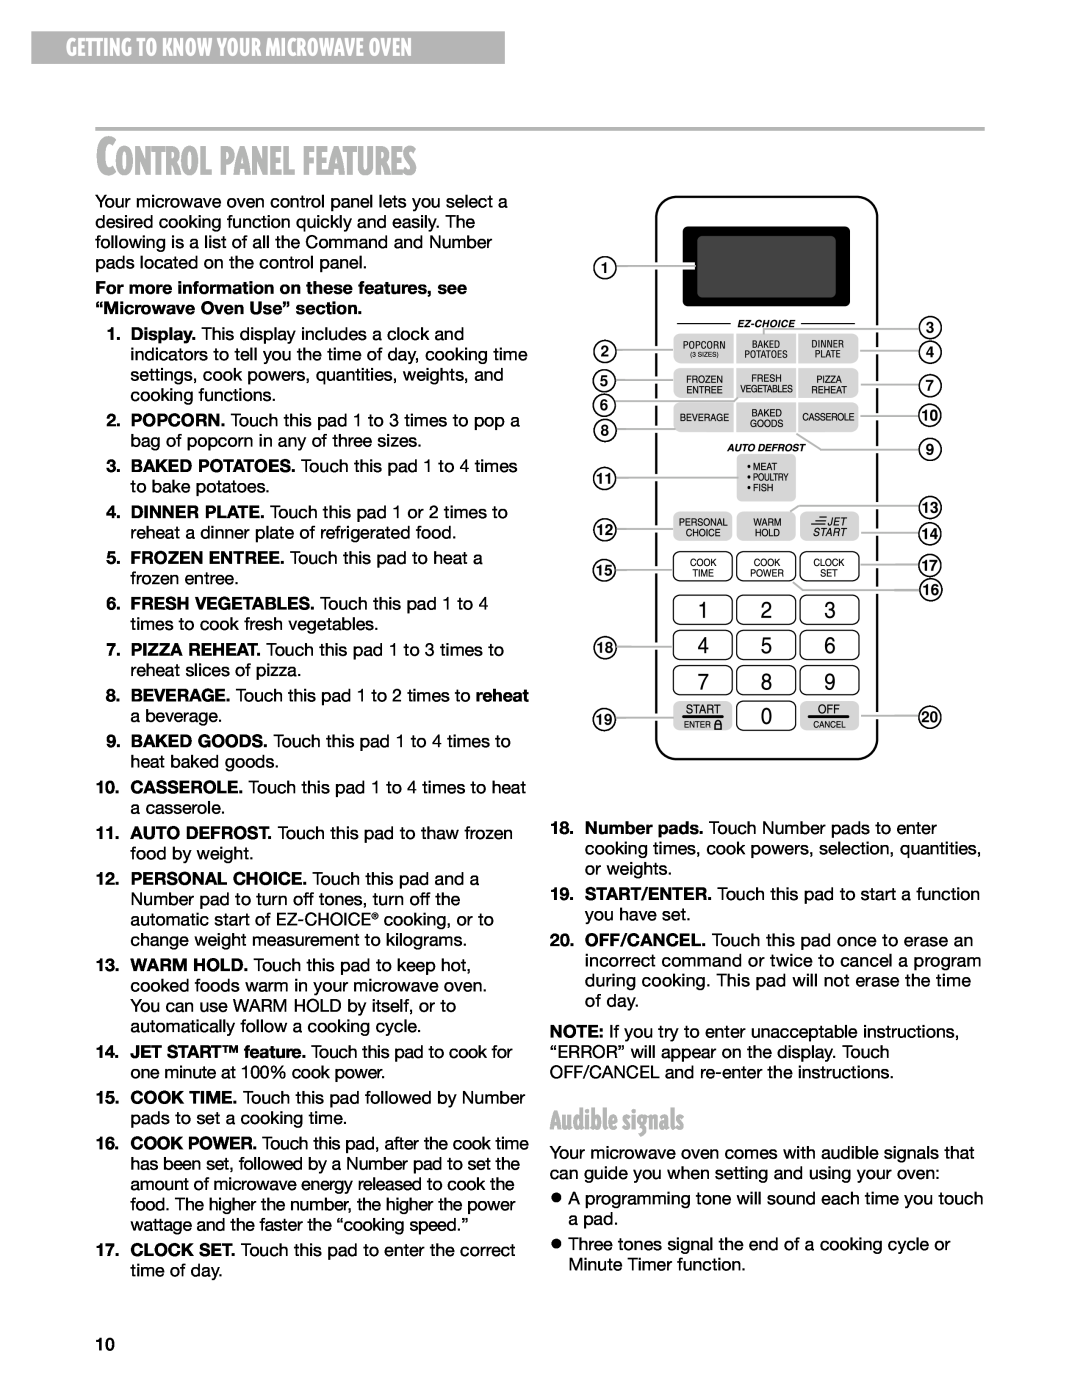 Whirlpool MT1111SK installation instructions Audible signals, Control Panel Features, Getting To Know Your Microwave Oven 